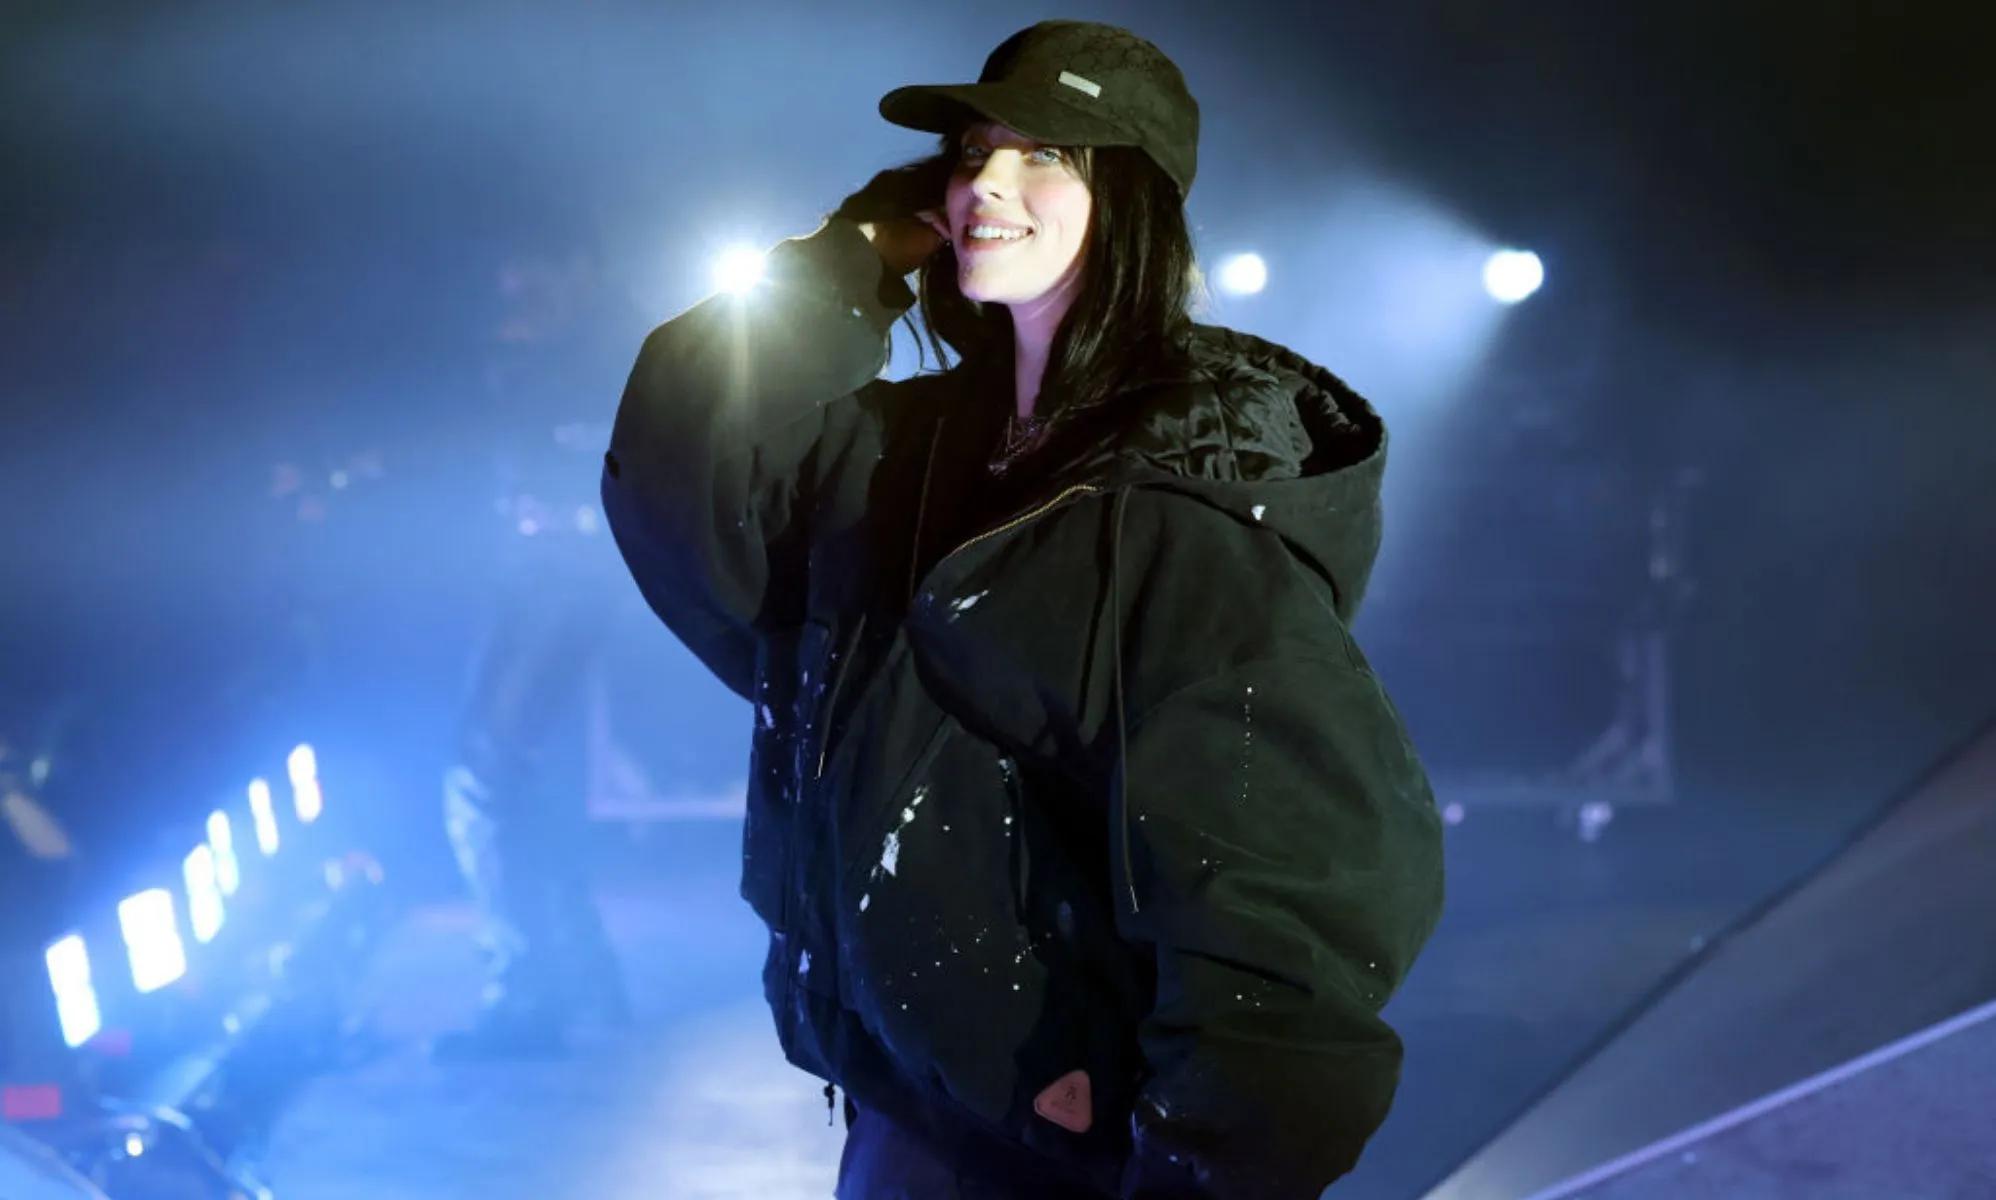 Billie Eilish ticket prices revealed for her world tour dates [Video]